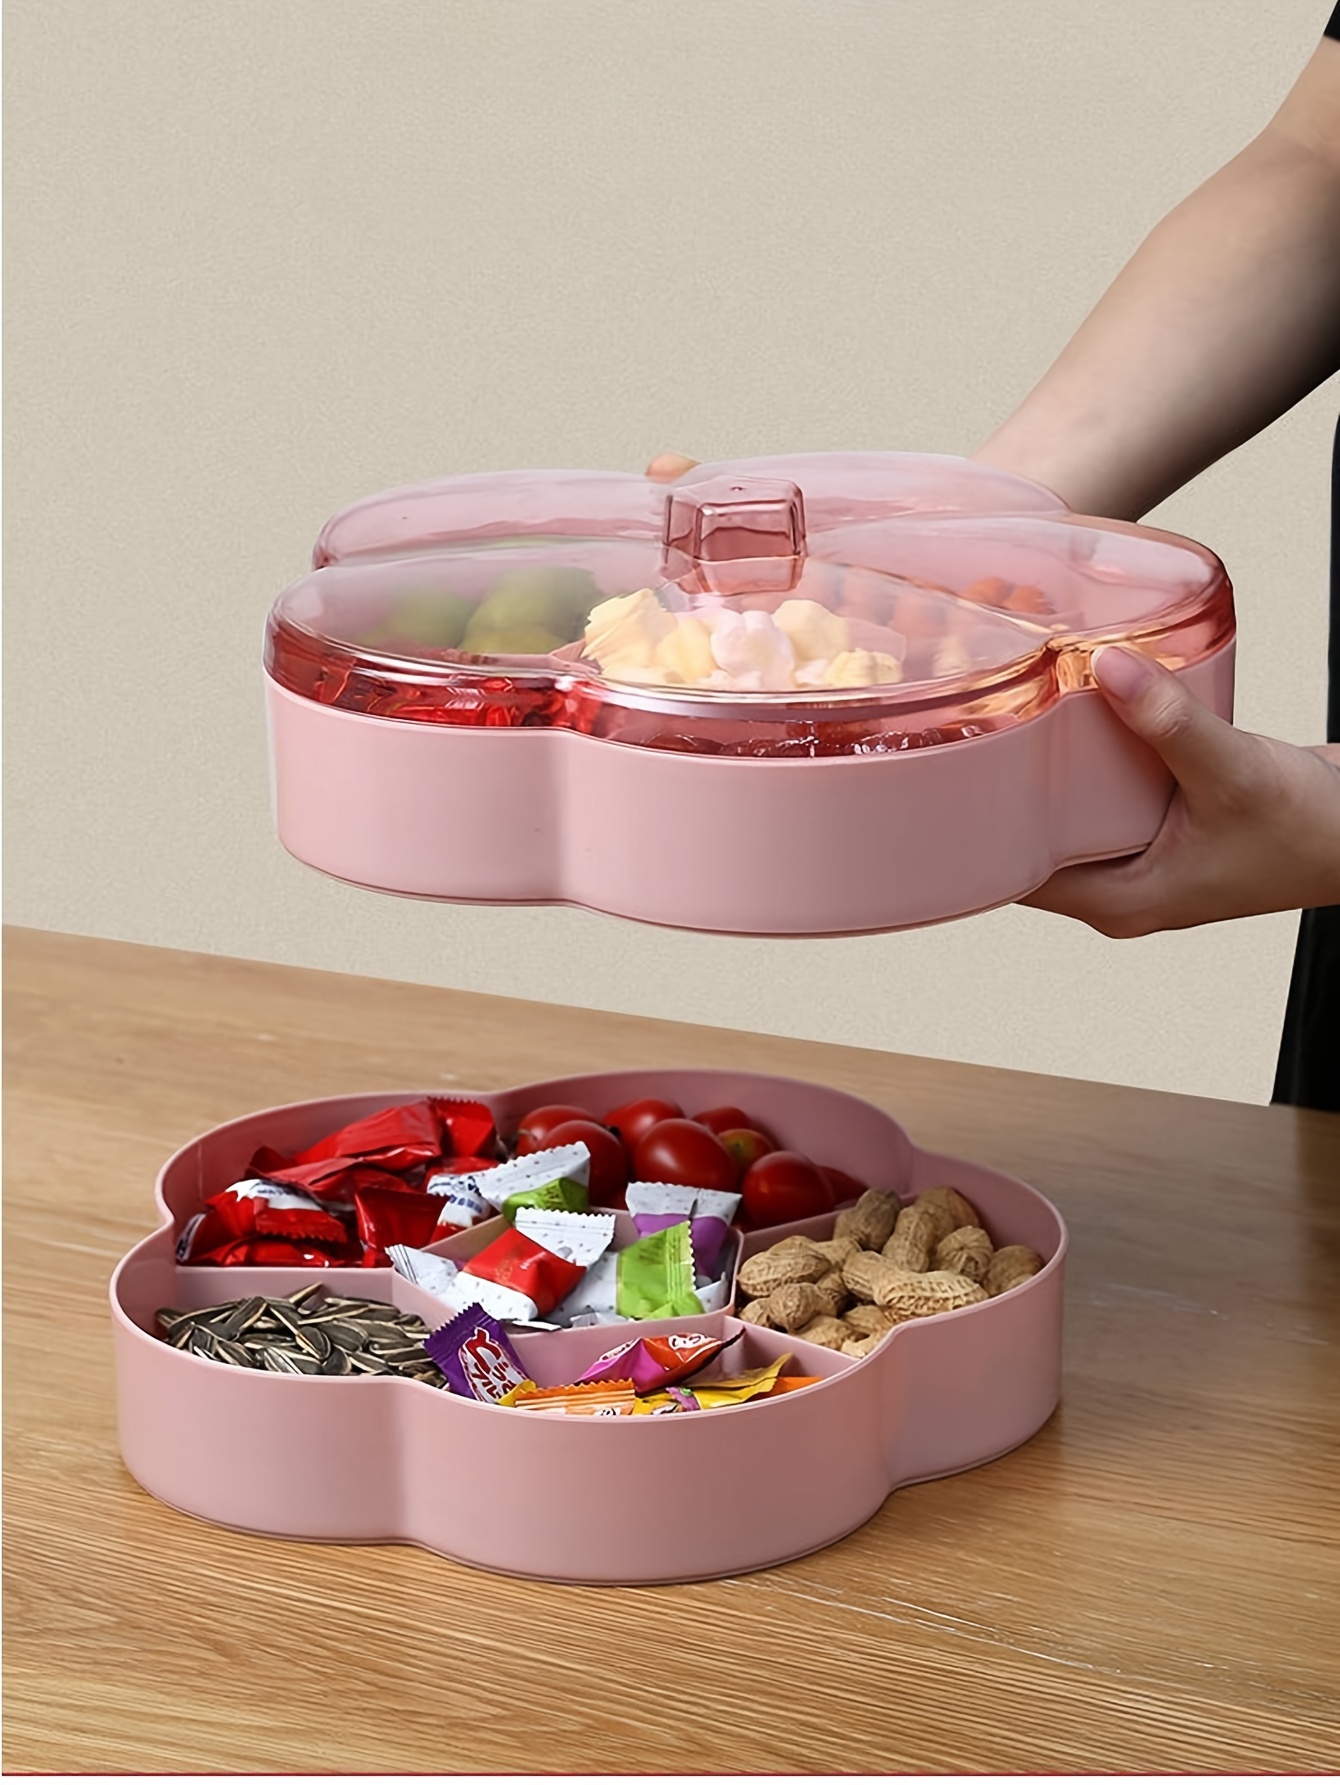 KUNIJIWA Snack Storage Box, Dried Fruit Tray, 6 Plastic Compartment Box  Clear Organizer - for Candy, Fruits, Nuts, Snacks Parties Entertaining(9.84  *